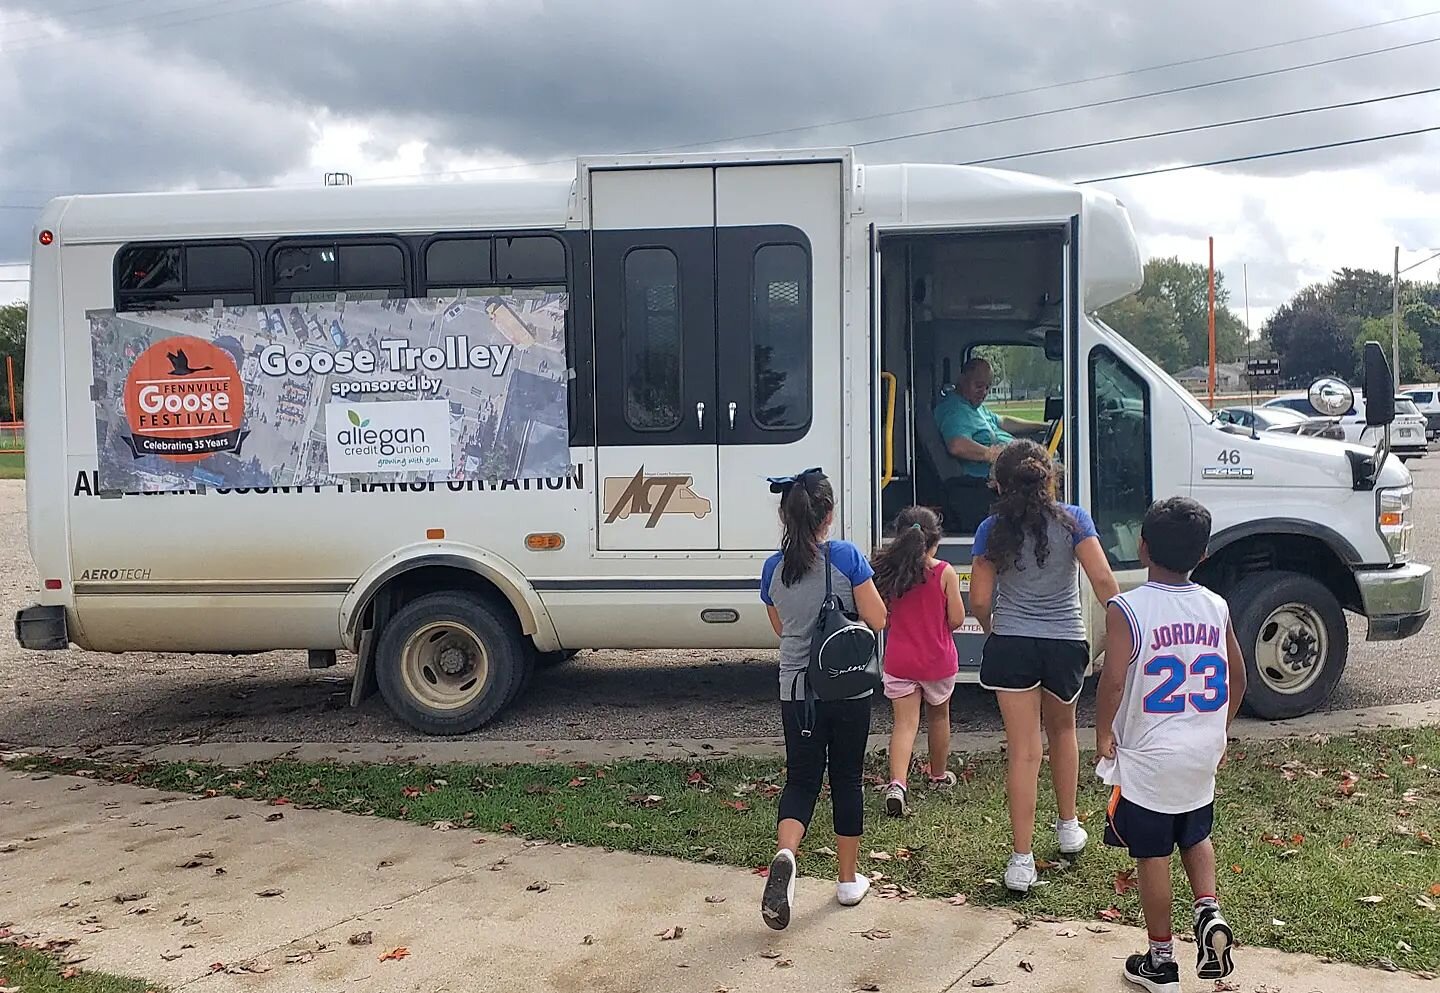 Our Goose Trolley parking shuttle is available Sunday 11am to 4pm. You can park at Fennville high school and catch a ride to the carnival or city hall.

Thank you Allegan County Transportation and Allegan Credit Union!